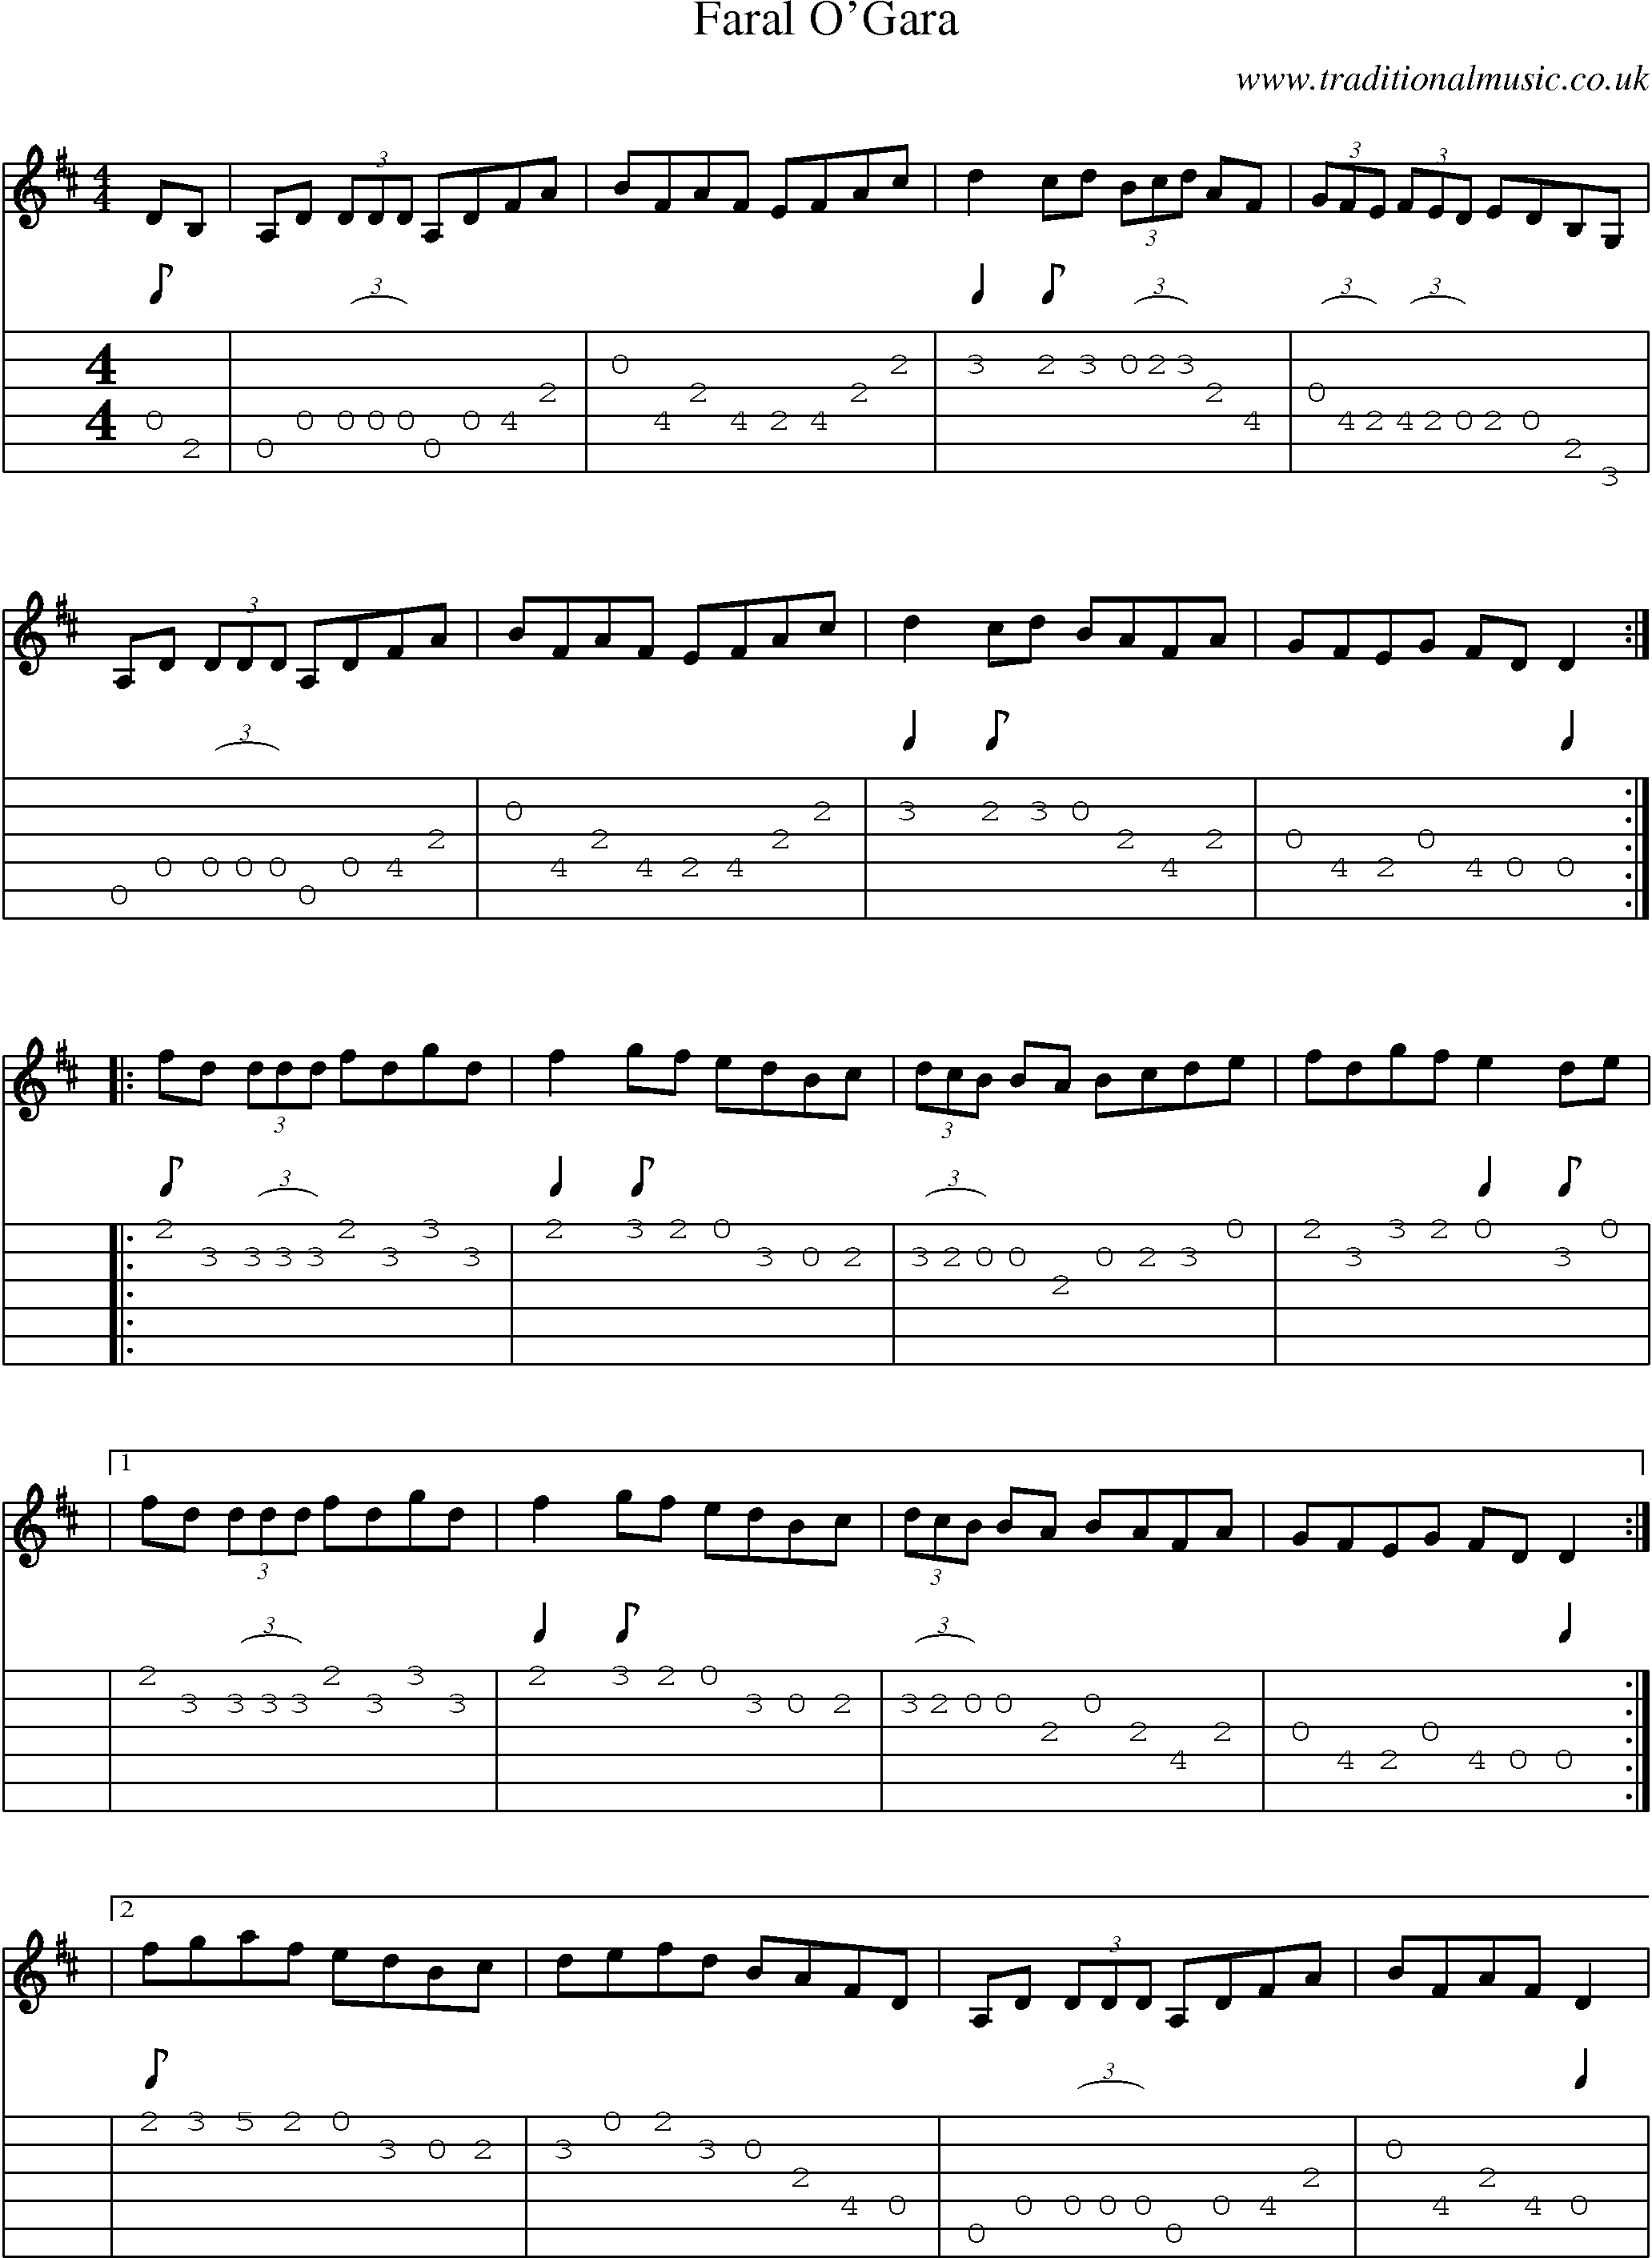 Music Score and Guitar Tabs for Faral Ogara